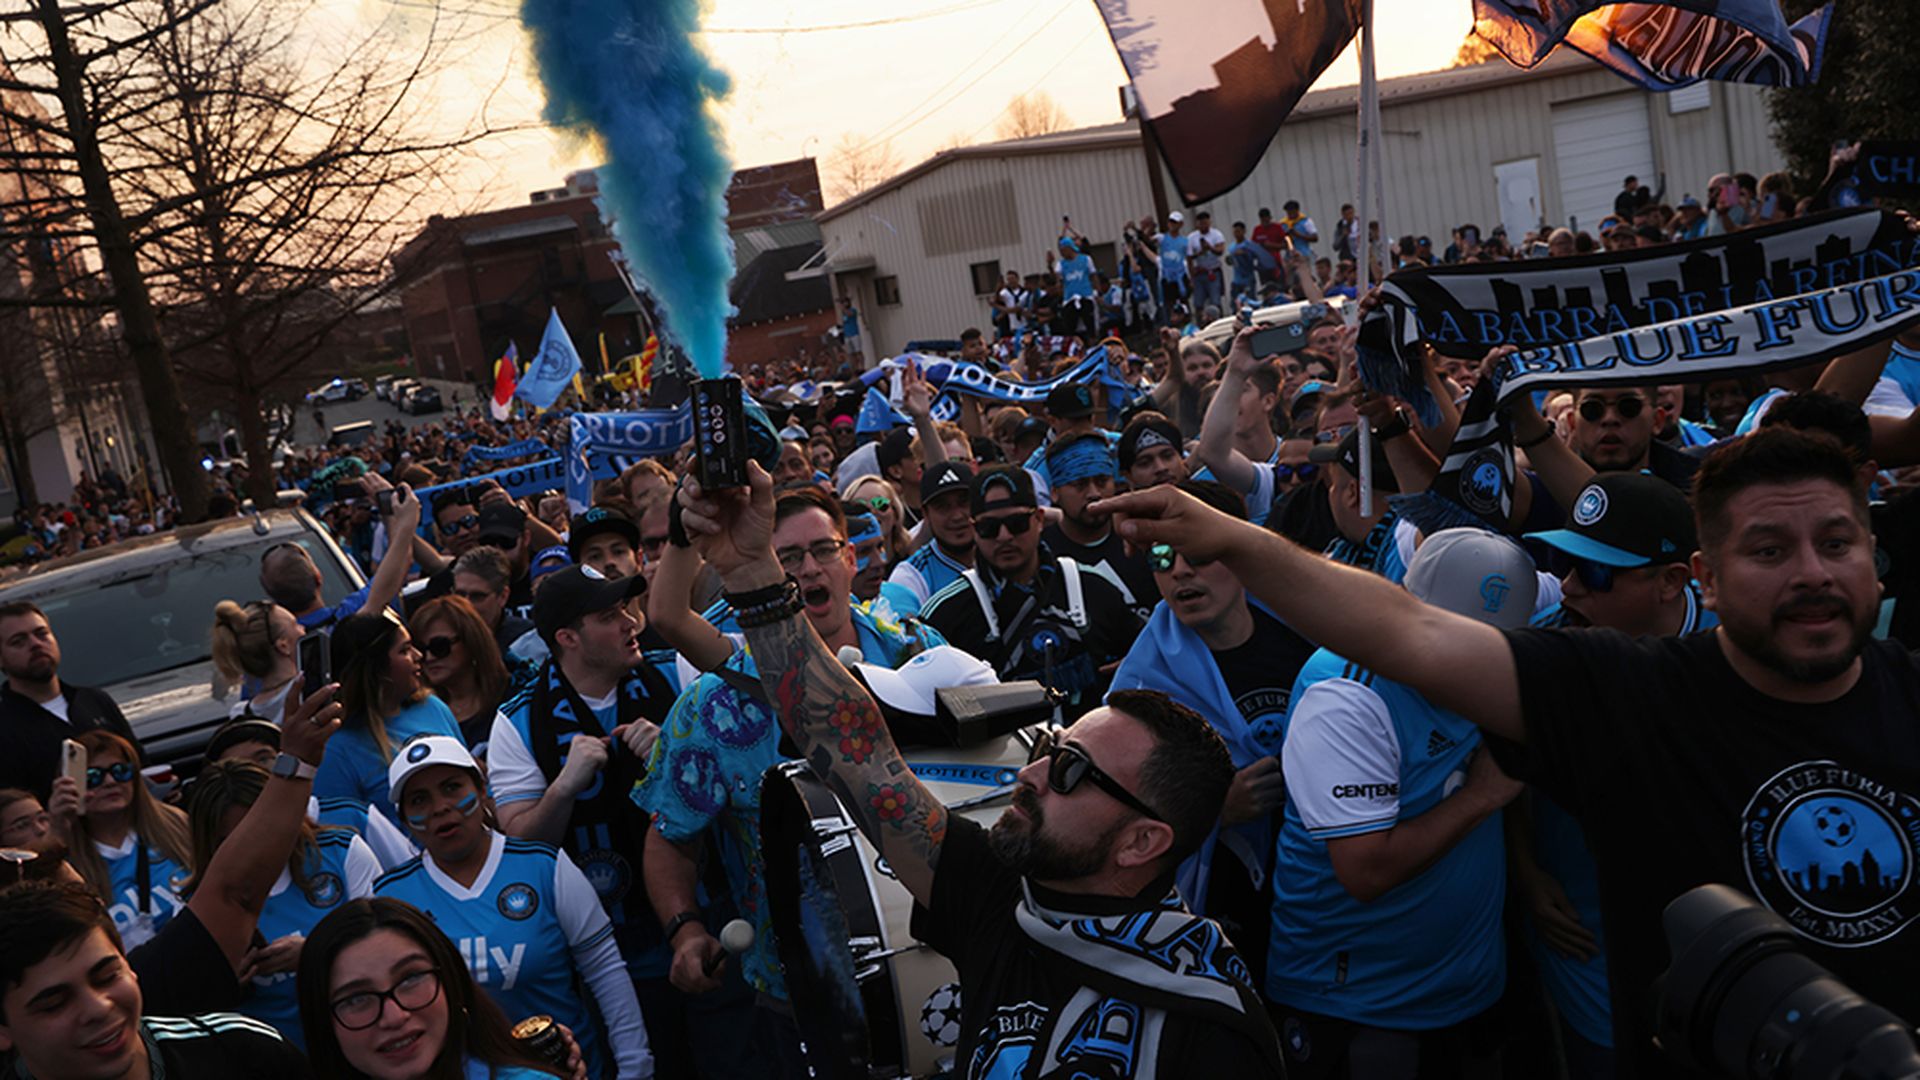 Supporters march toward Charlotte FC’s inaugural home match at Bank of America Stadium on March 5, 2022. Photo: Travis Dove/Axios